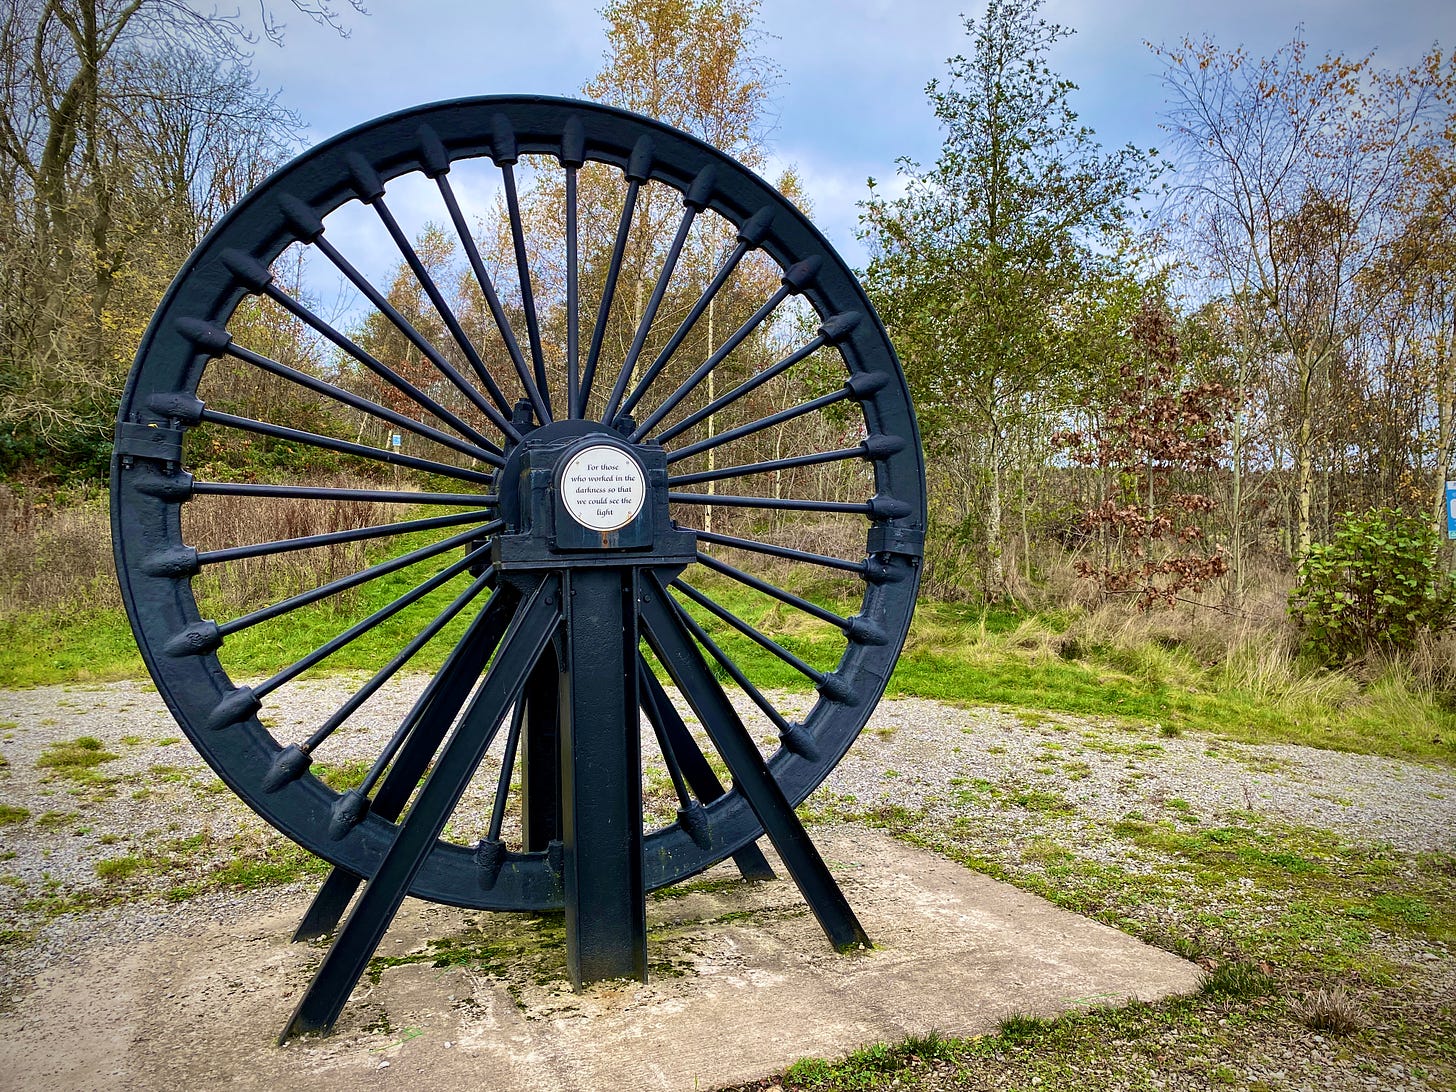 Colliery pit wheel at entrance to Silverdale Country Park.